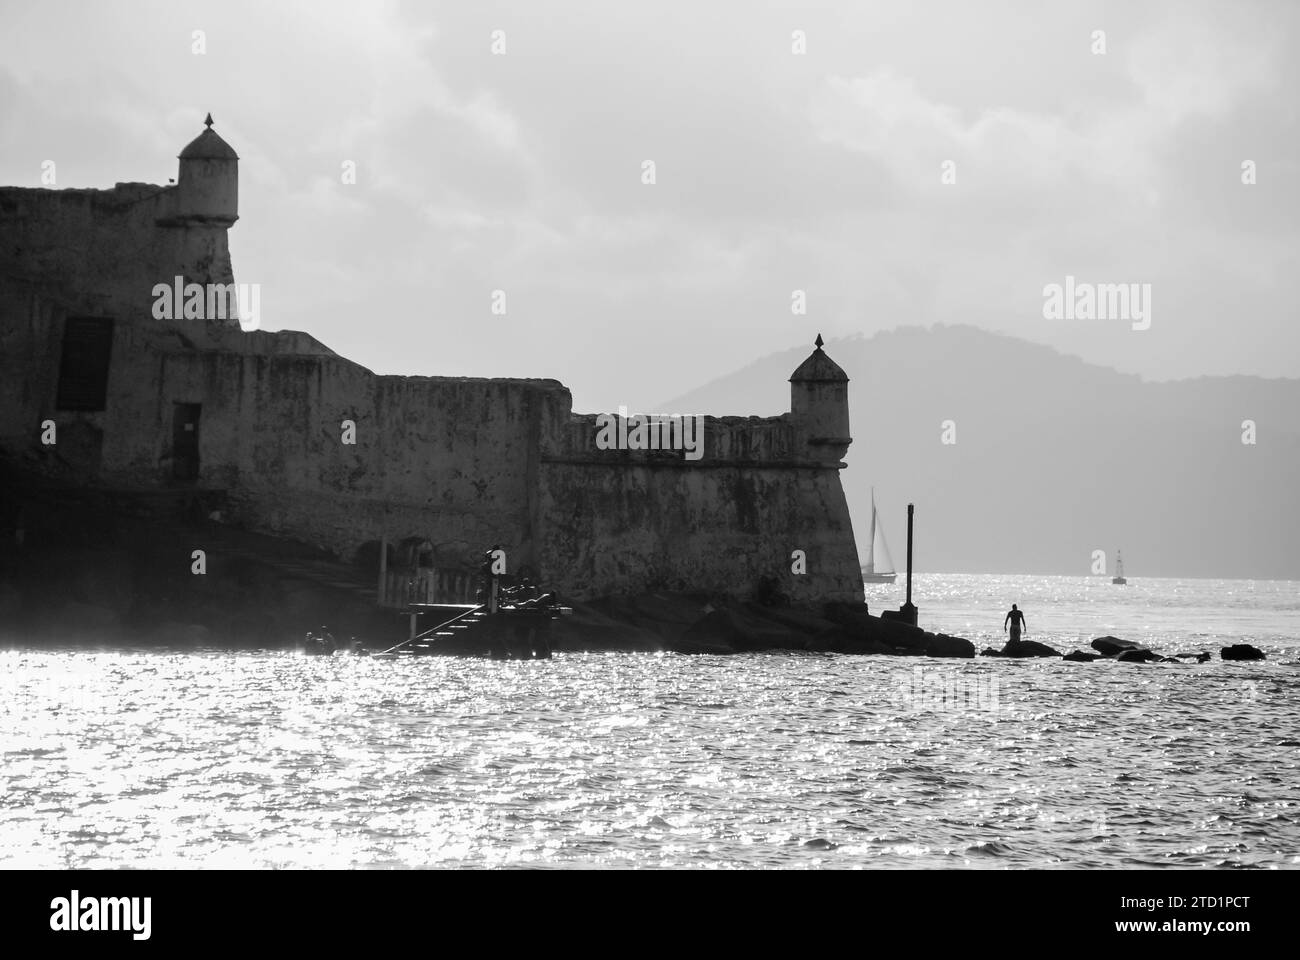 City of Guarujá, São Paulo, Brazil. Sunset at the Santo Amaro da Barra Grande Fortress. Museum located on the Port of Santos canal. BW image. Stock Photo